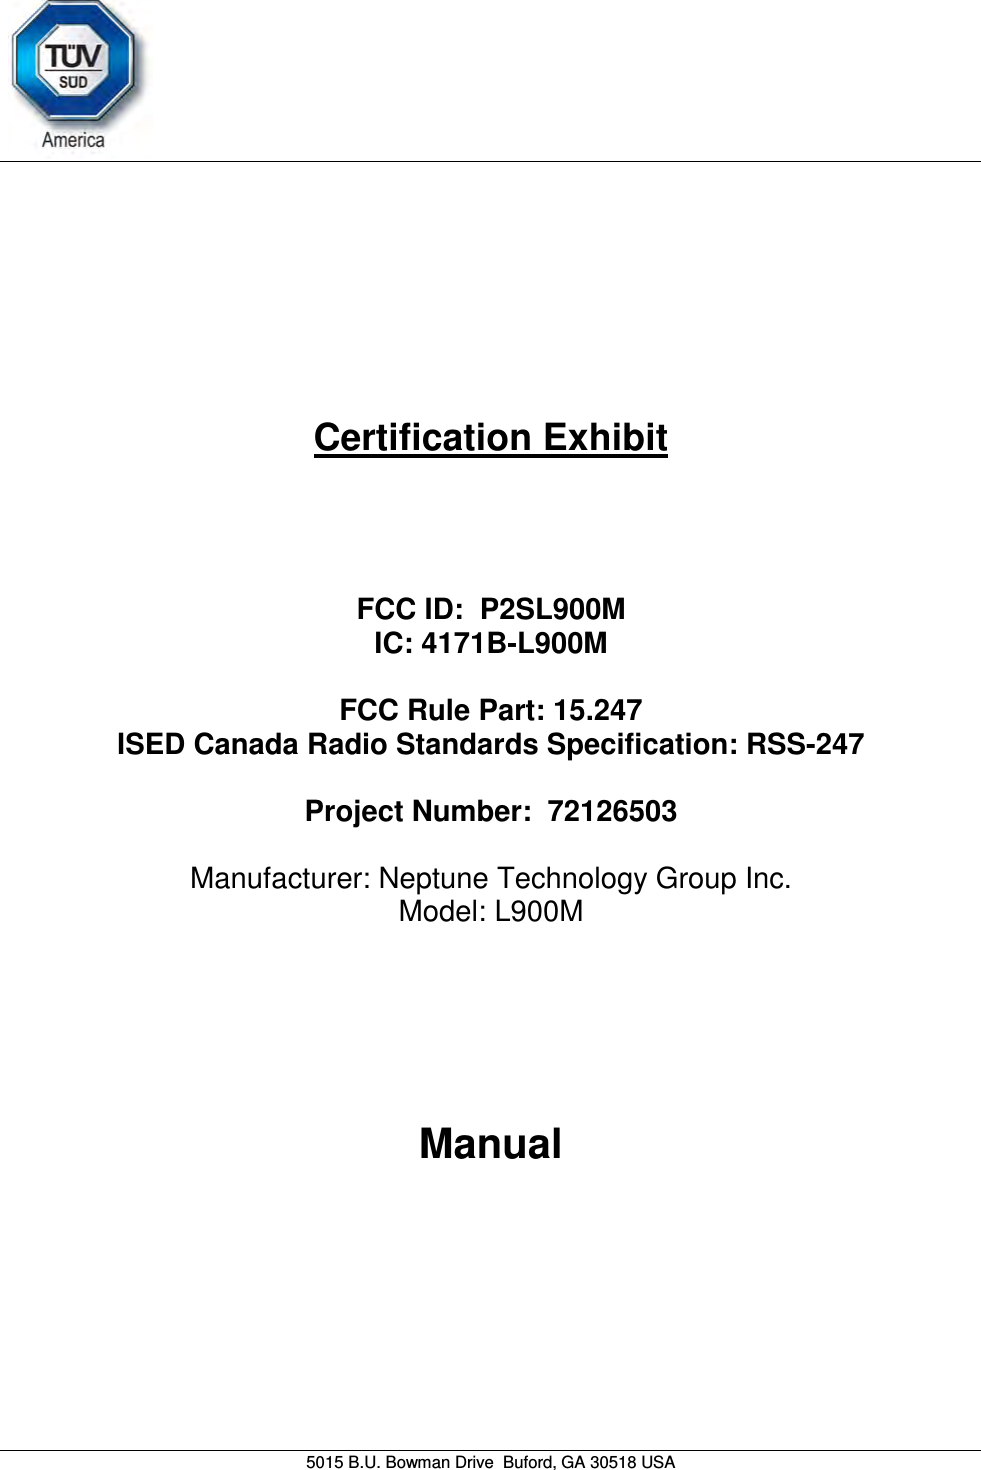     5015 B.U. Bowman Drive  Buford, GA 30518 USA   Certification Exhibit     FCC ID:  P2SL900M IC: 4171B-L900M  FCC Rule Part: 15.247 ISED Canada Radio Standards Specification: RSS-247  Project Number:  72126503   Manufacturer: Neptune Technology Group Inc. Model: L900M     Manual   